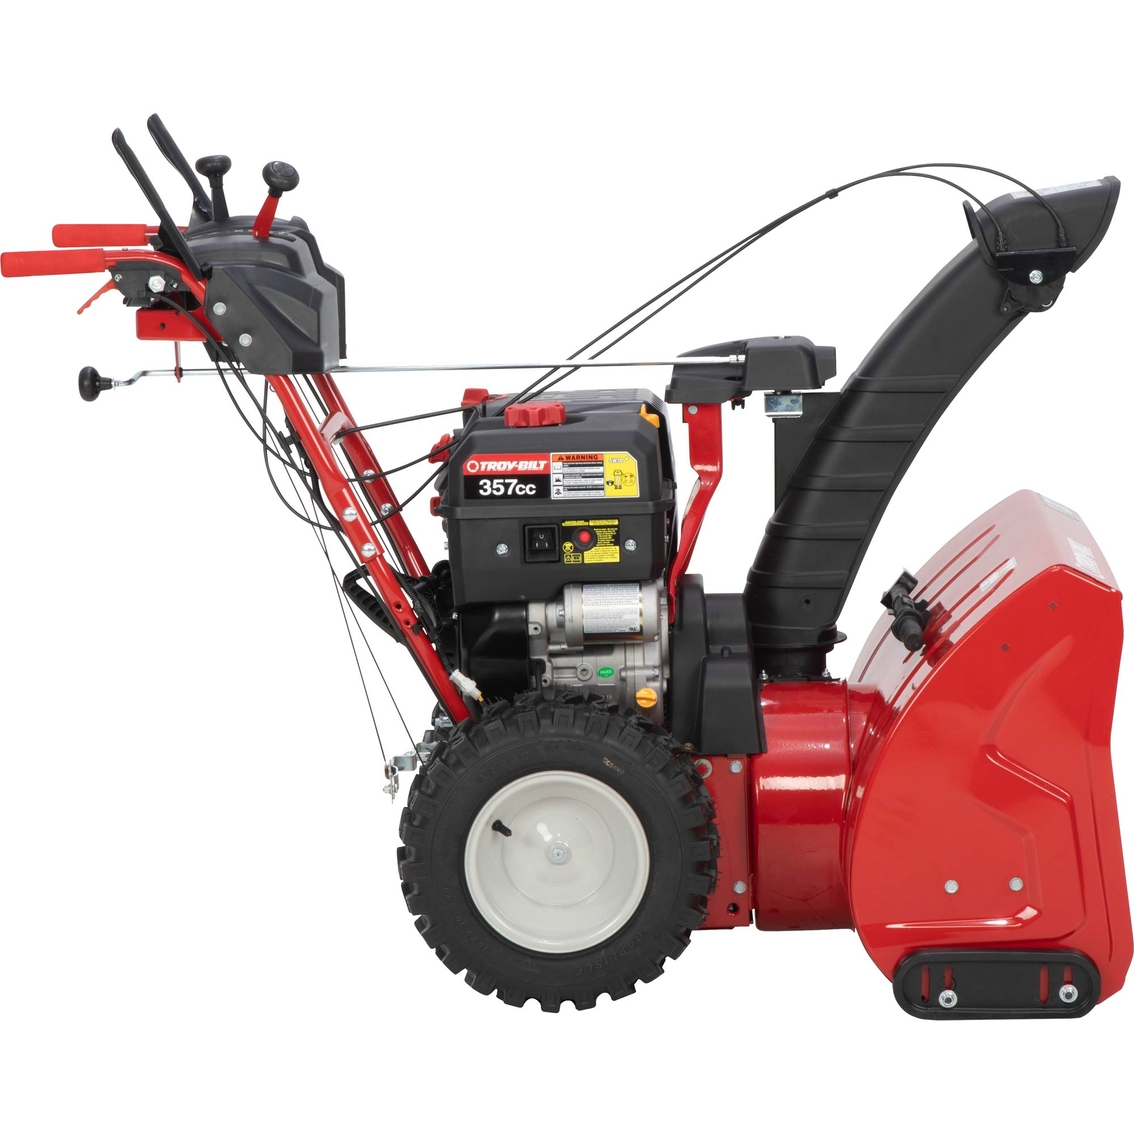 Troy-Bilt Storm 3090 2 Stage 30 in. Snowthrower - Image 4 of 8